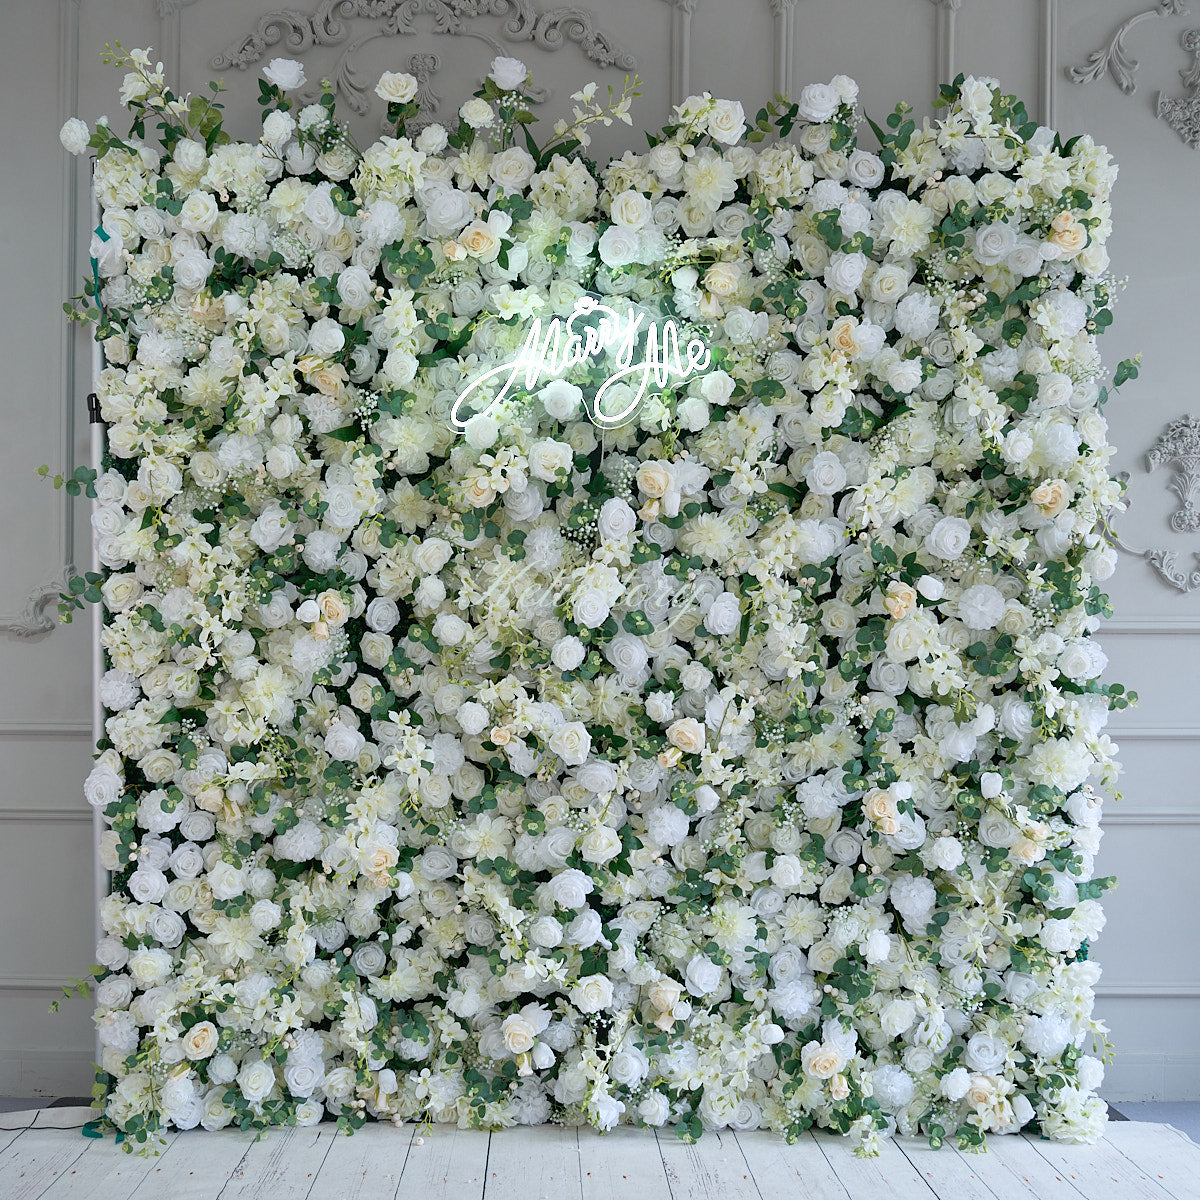 Flower Wall White & Champagne Fabric Rolling Up Curtain Floral Backdrop Wedding Party Proposal Decor